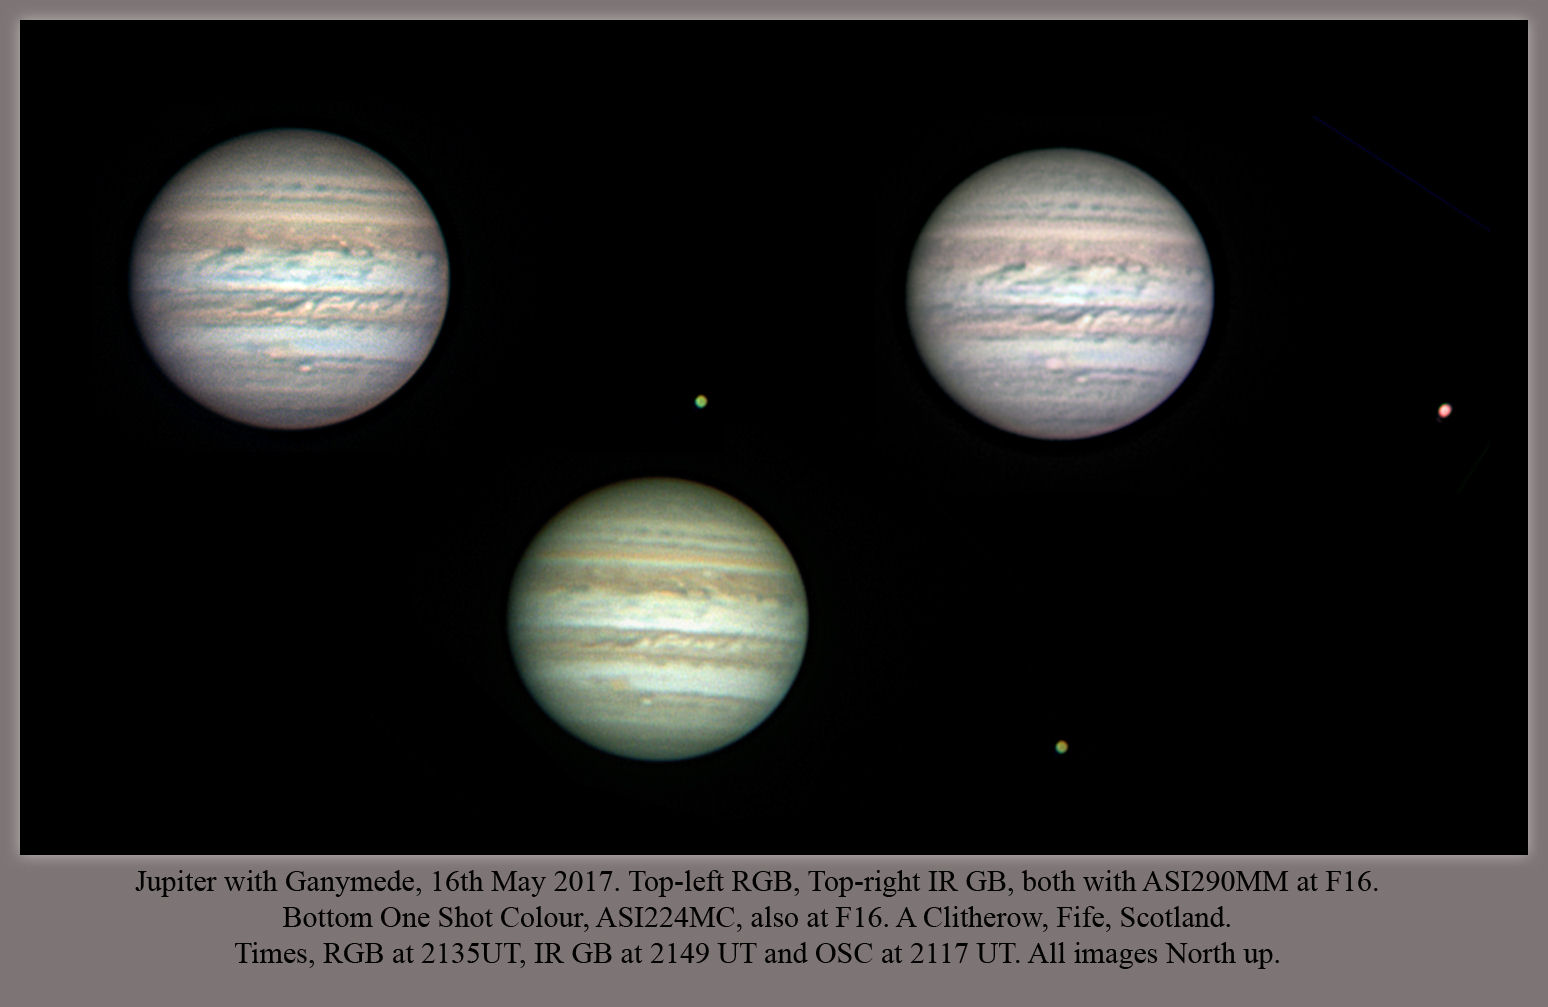 Jupiter collage by Alan Clitherow 16th may 2017